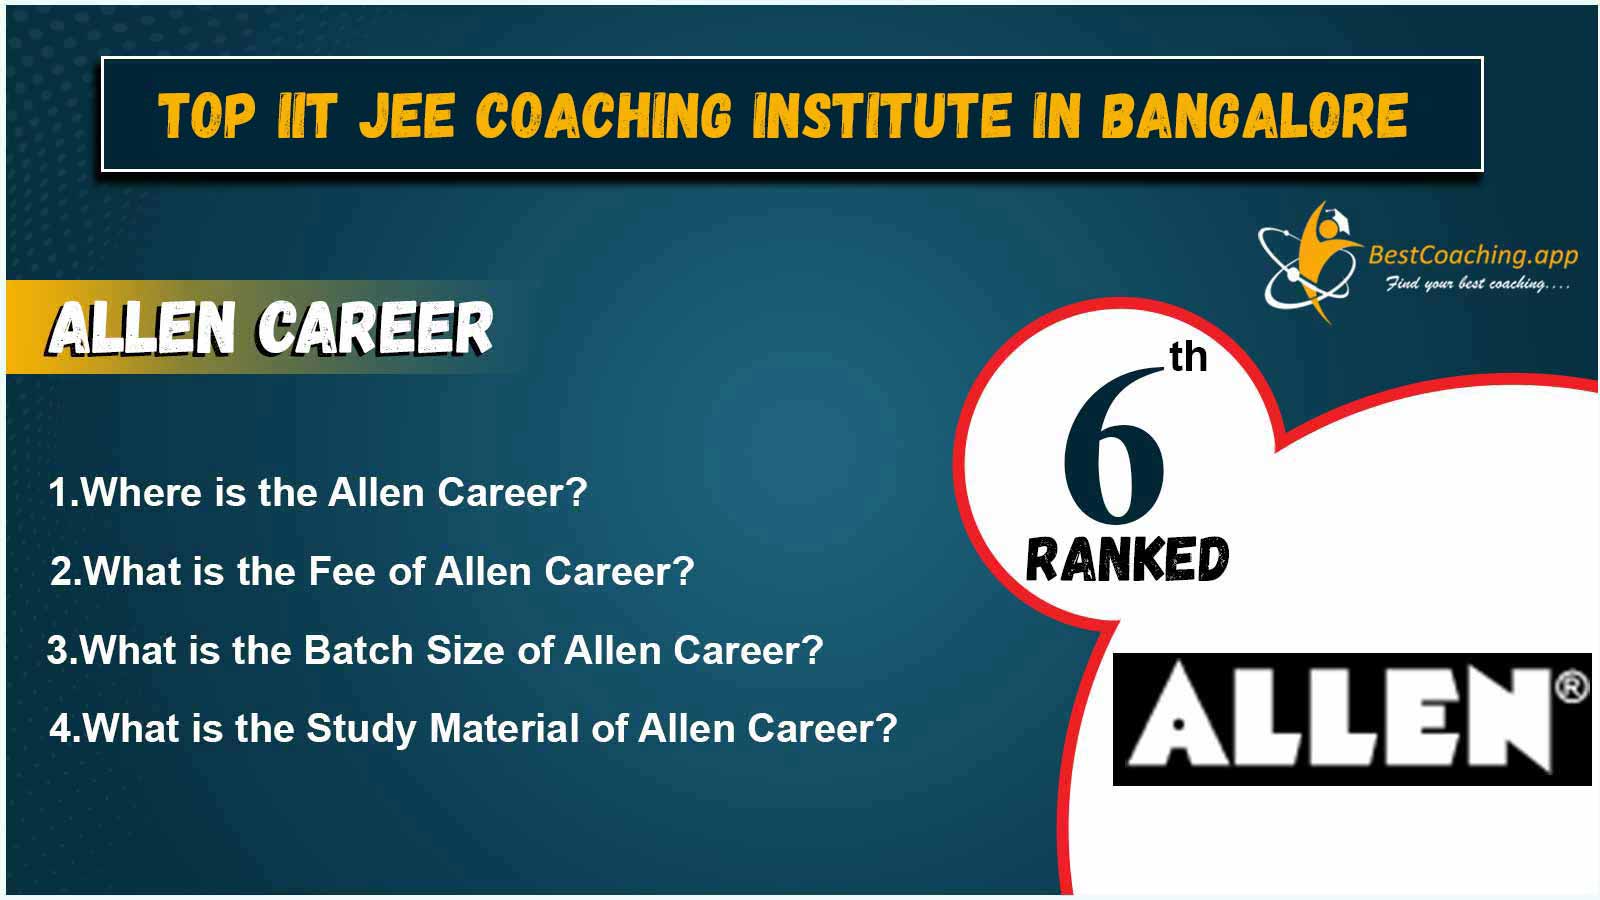 Top IIT JEE Coaching Centers In Bangalore